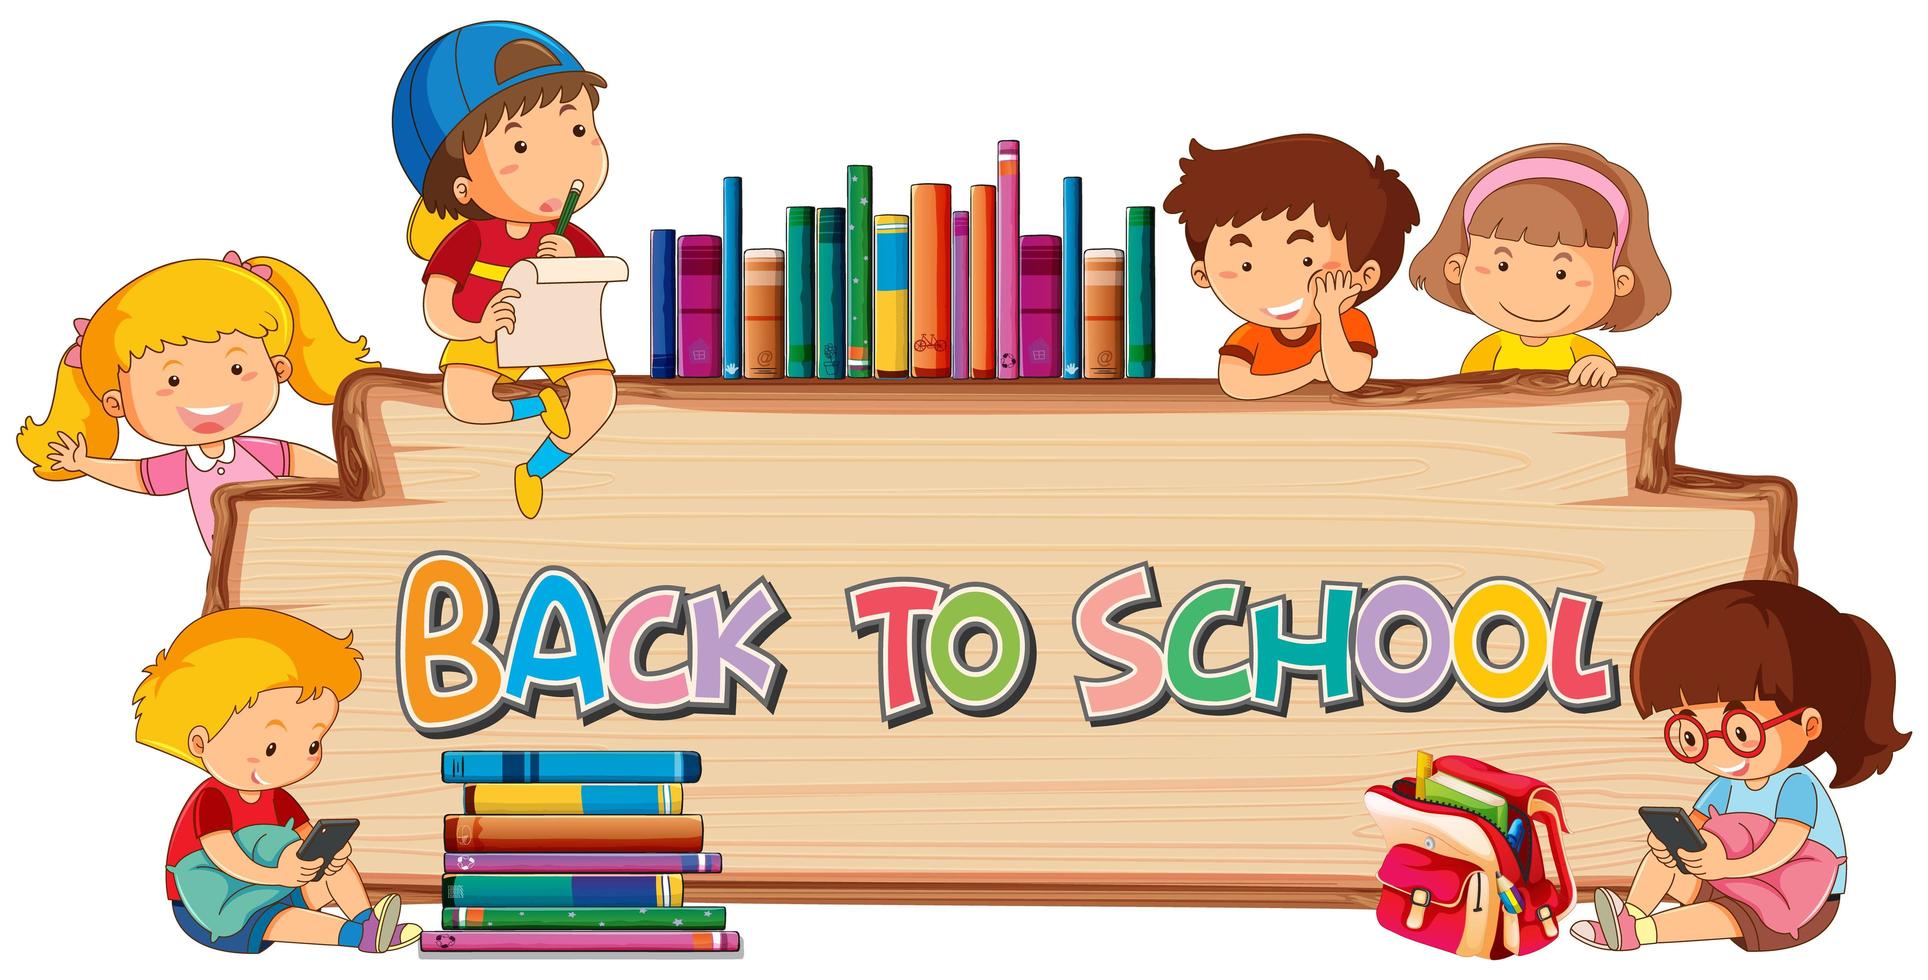 Back to school template on wooden board vector